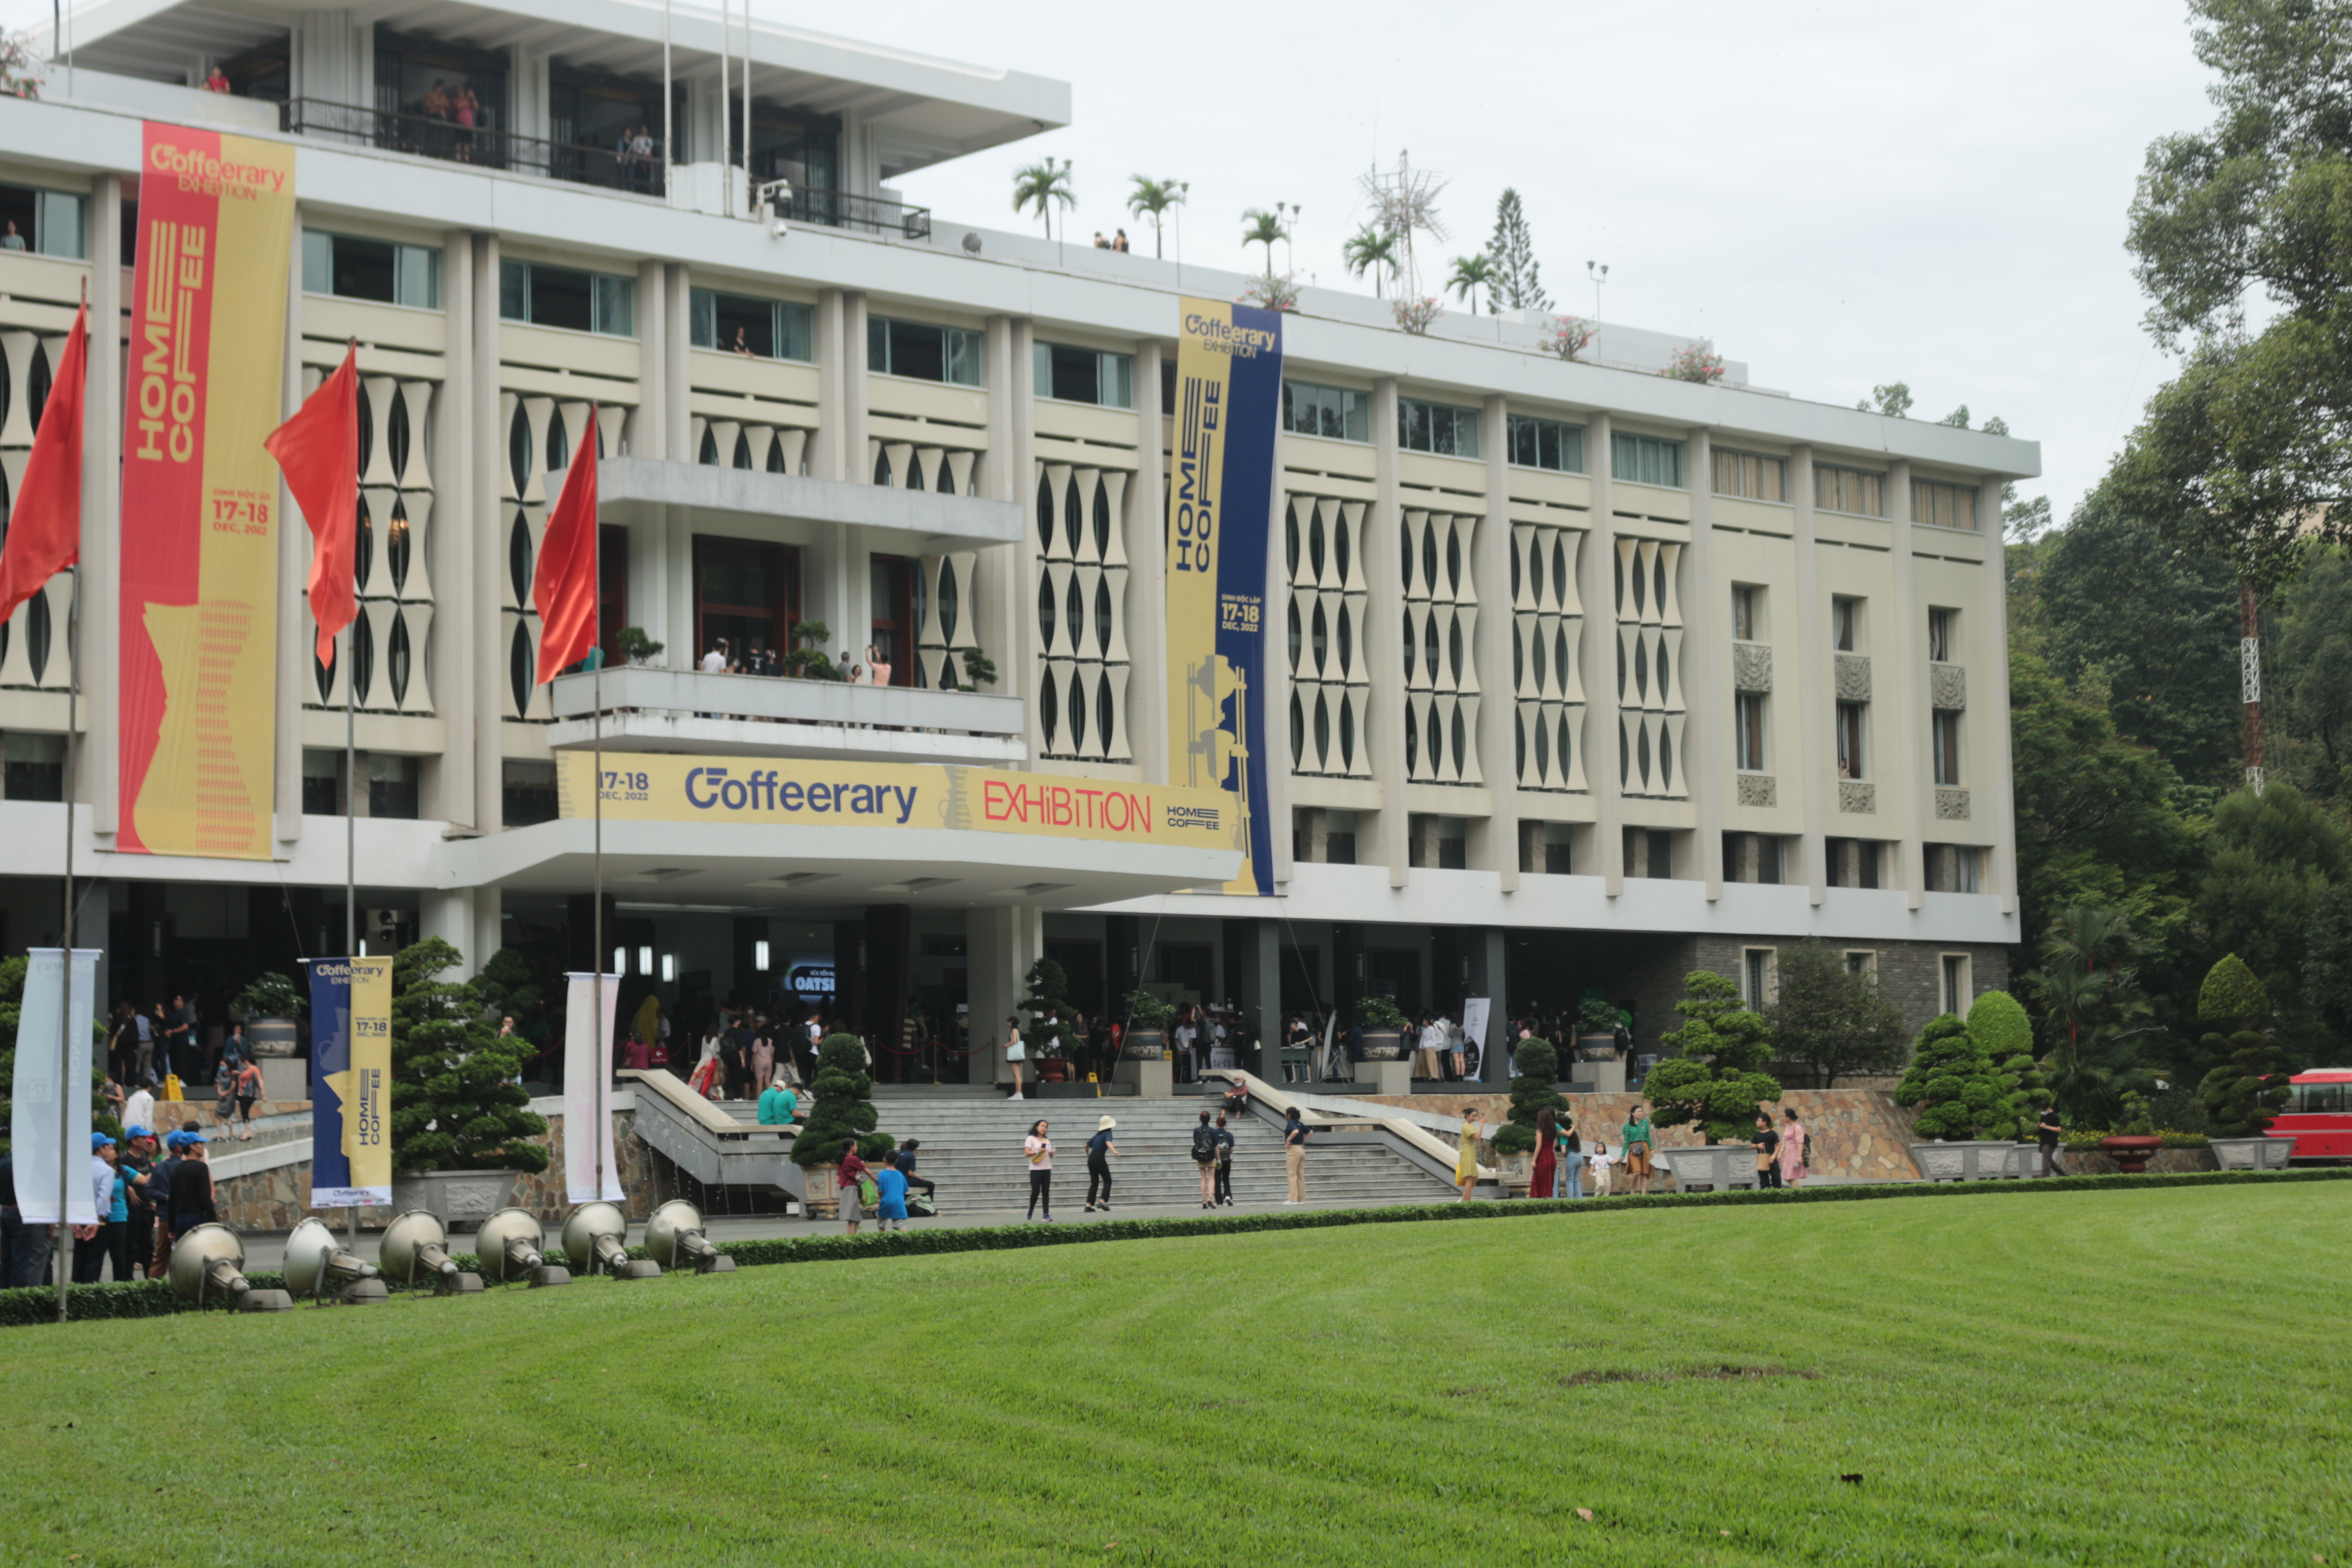 The Coffeerary Exhibition takes place at the Reunification Palace in District 1, Ho Chi Minh City on December 17 and 18, 2022. Photo: Ray Kuschert / Tuoi Tre News